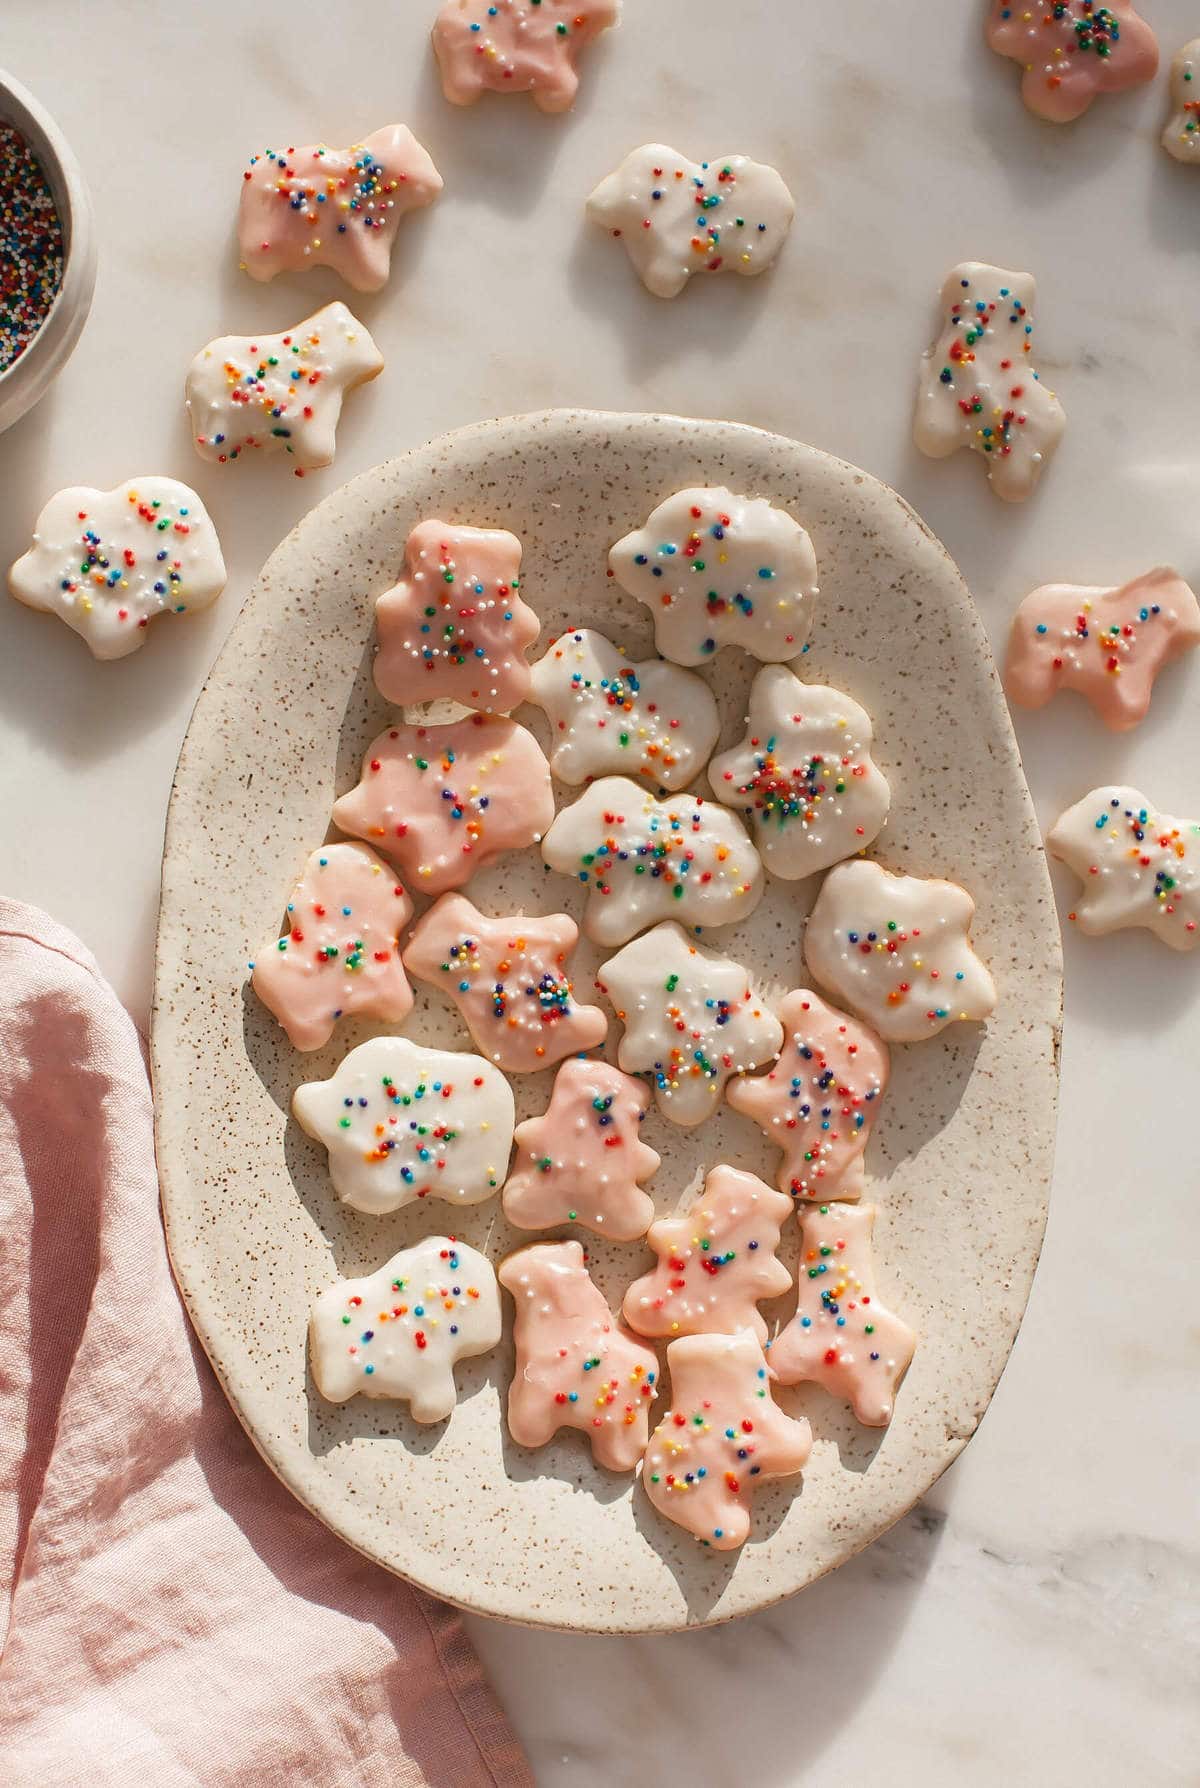 Step-by-Step Guide to Making Delicious Homemade Animal Crackers